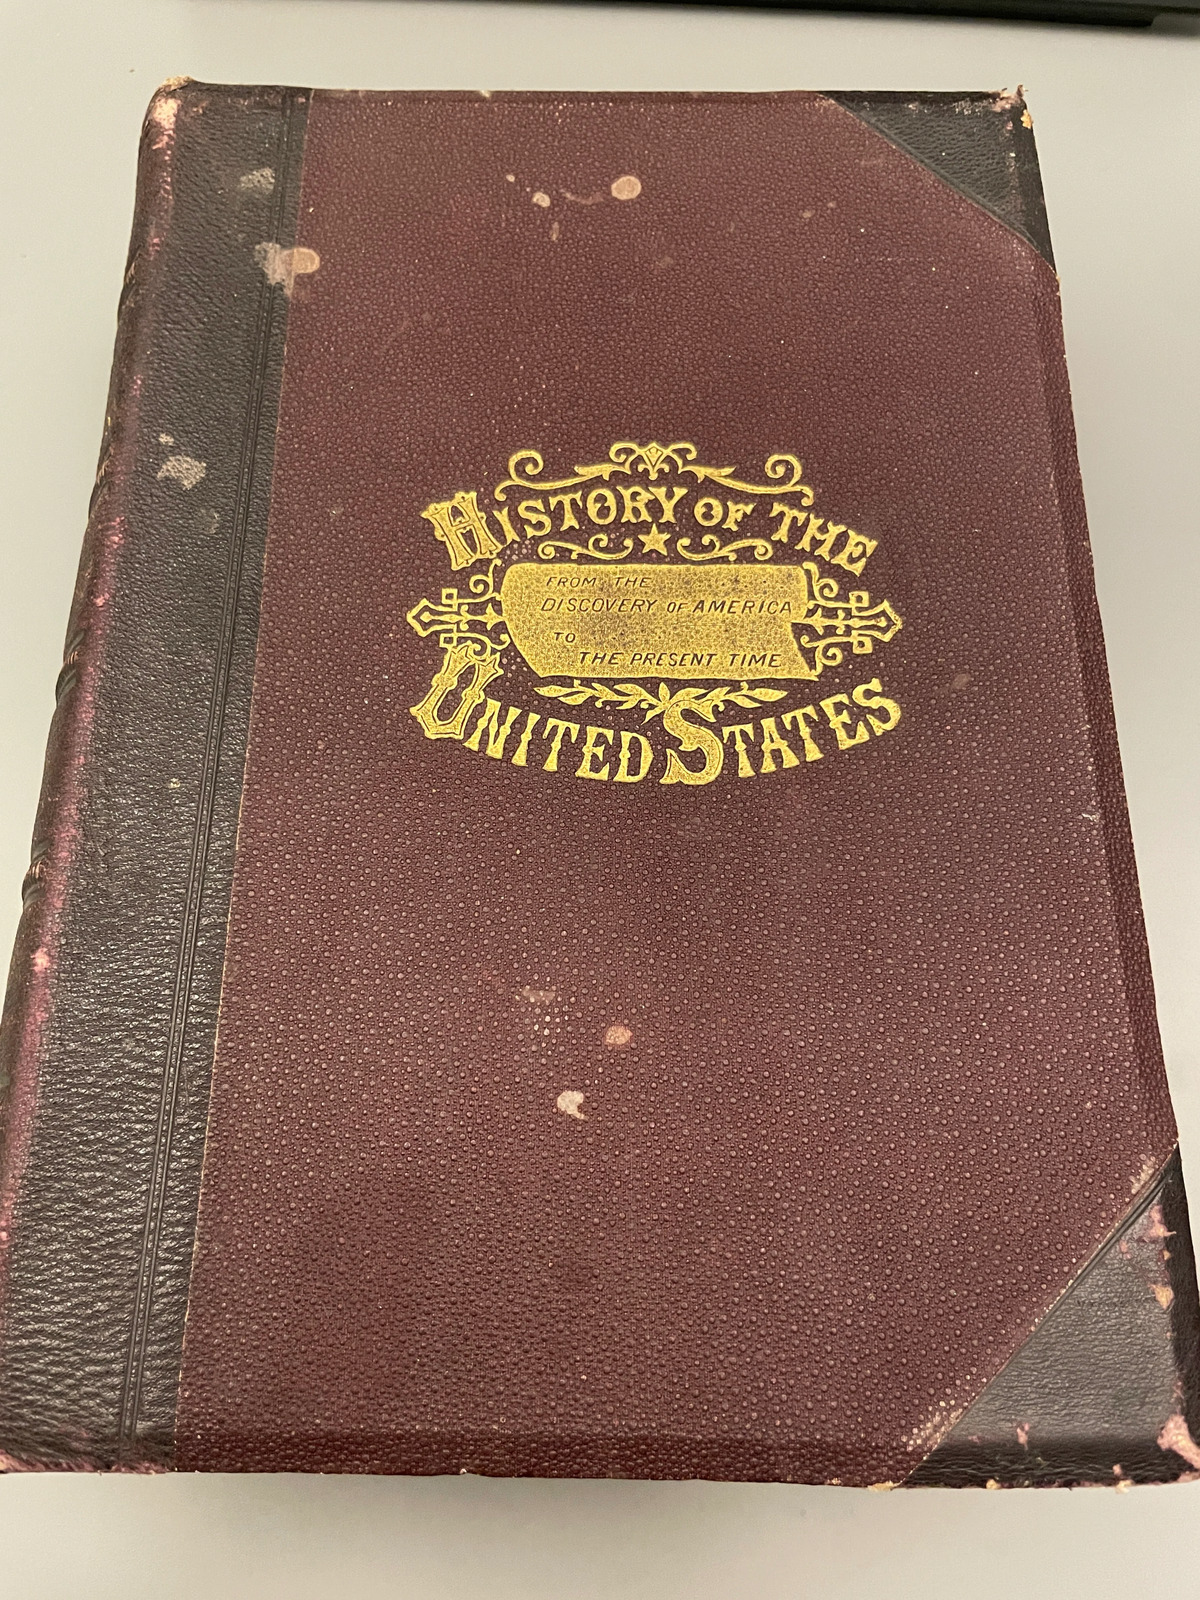 Antique 1876 Edition Of ‘History Of The United States - Aboriginal To Present’